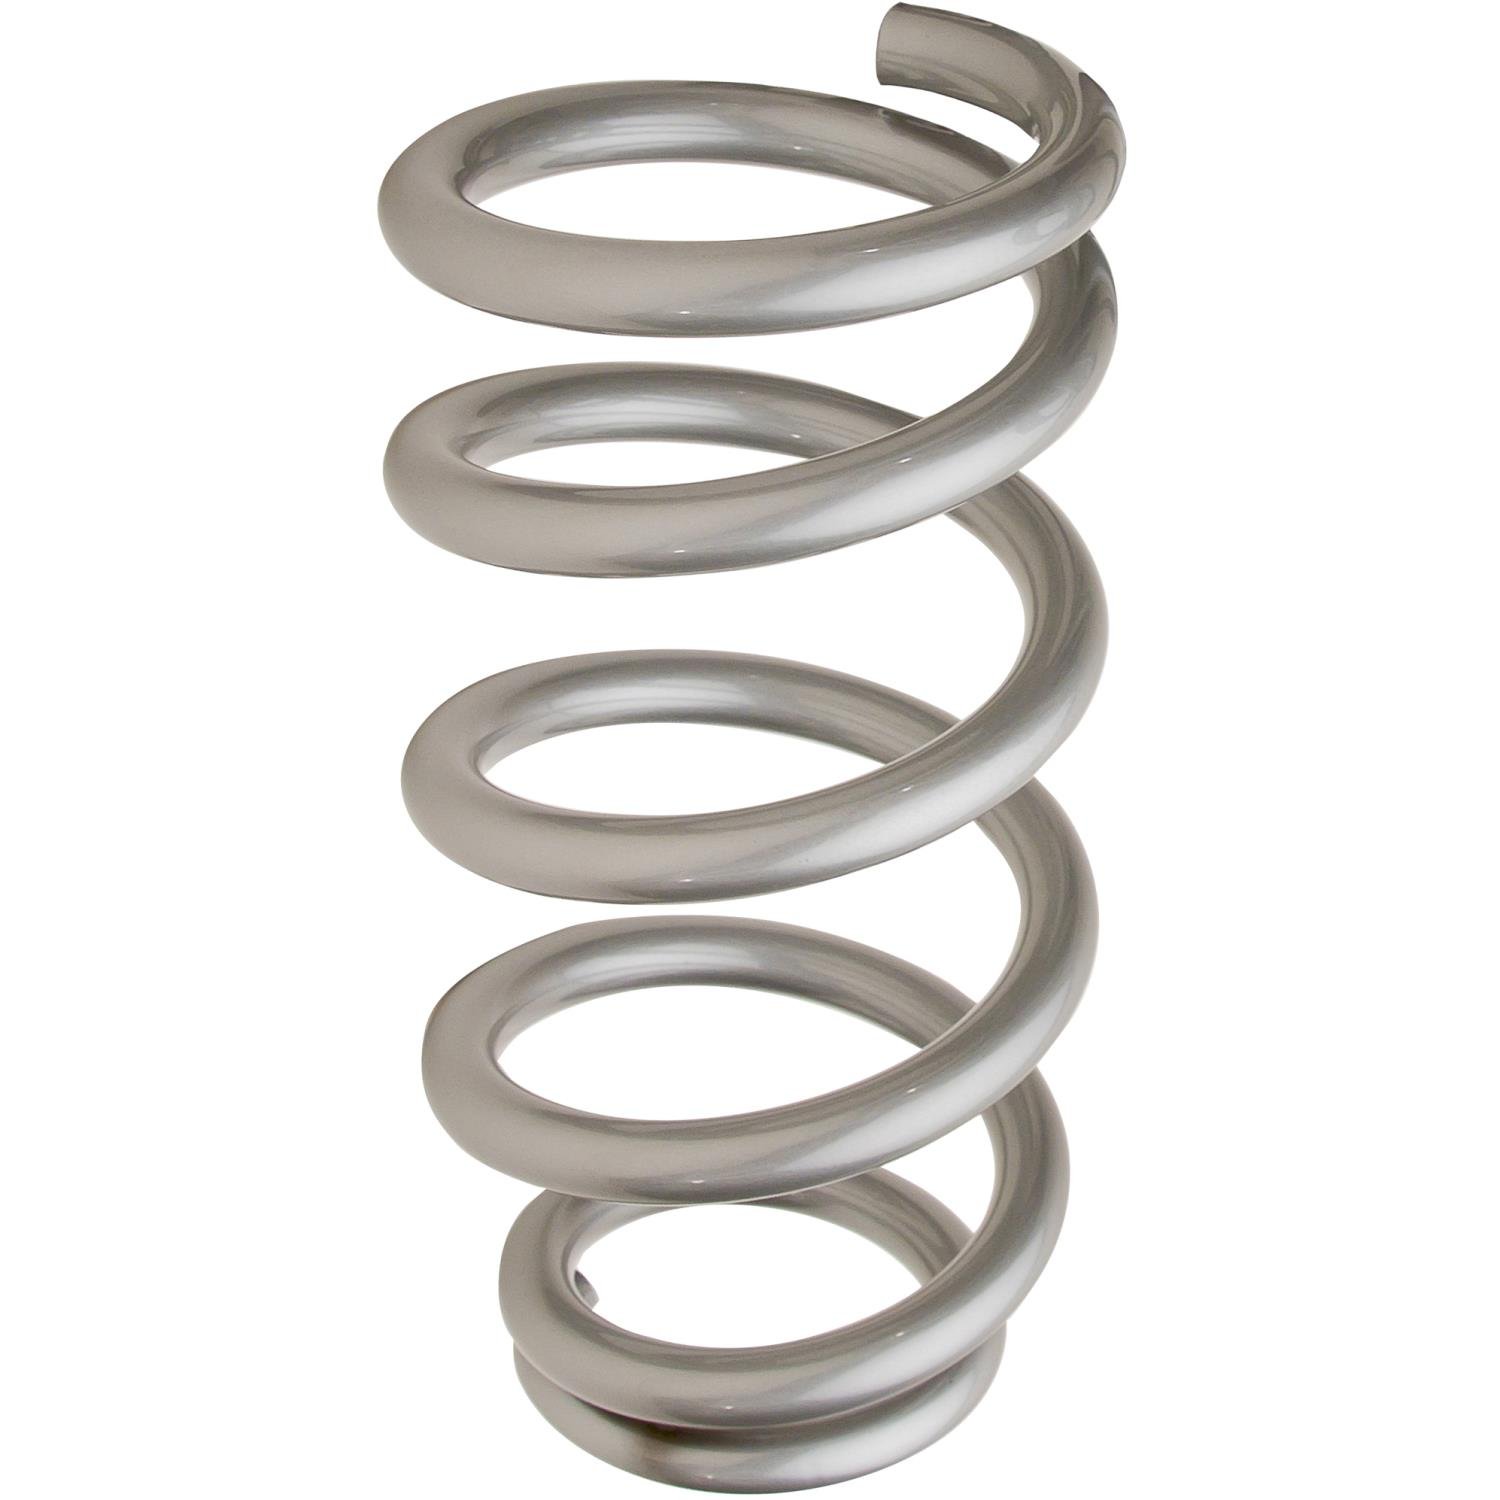 GM Style Flat & Ground High-Tensile Spring 11